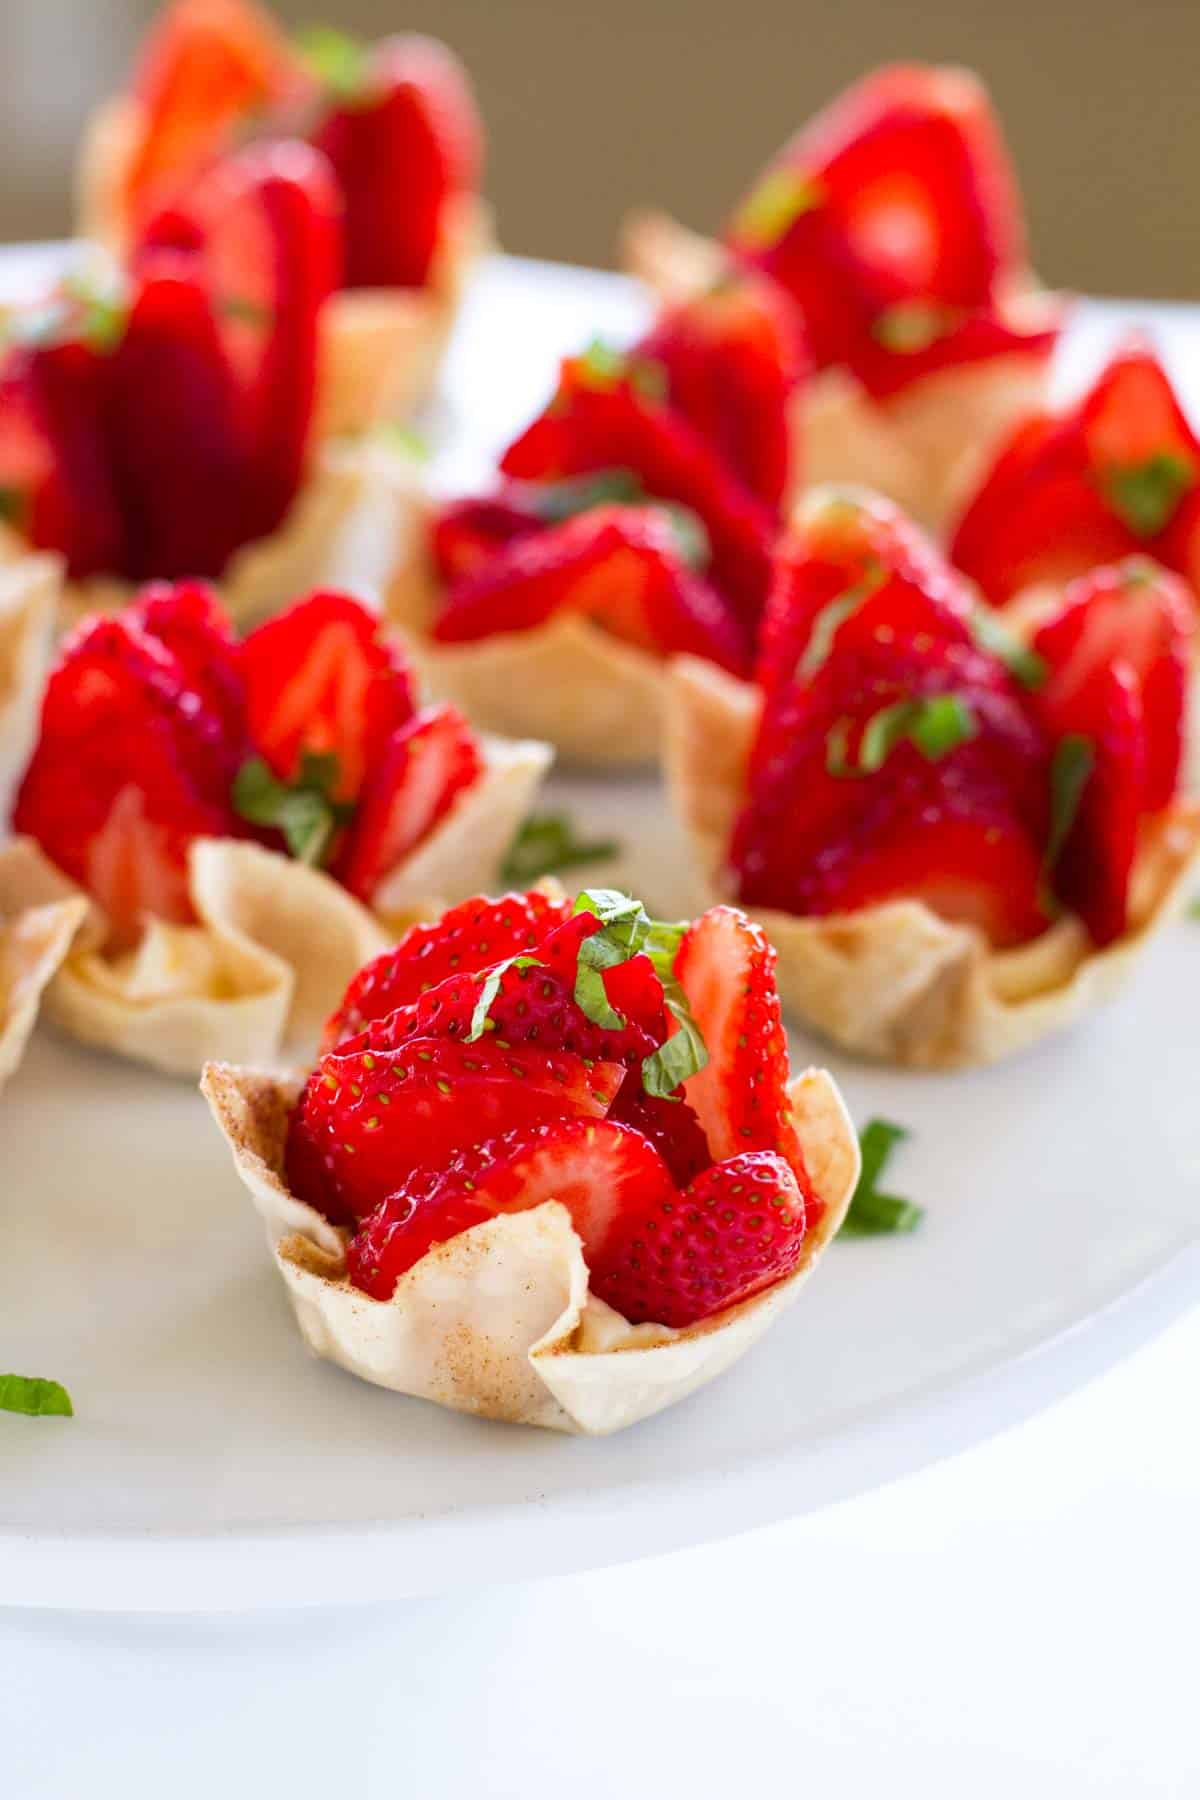 Strawberry Wonton Cups filled with cream cheese and topped with sliced strawberries.